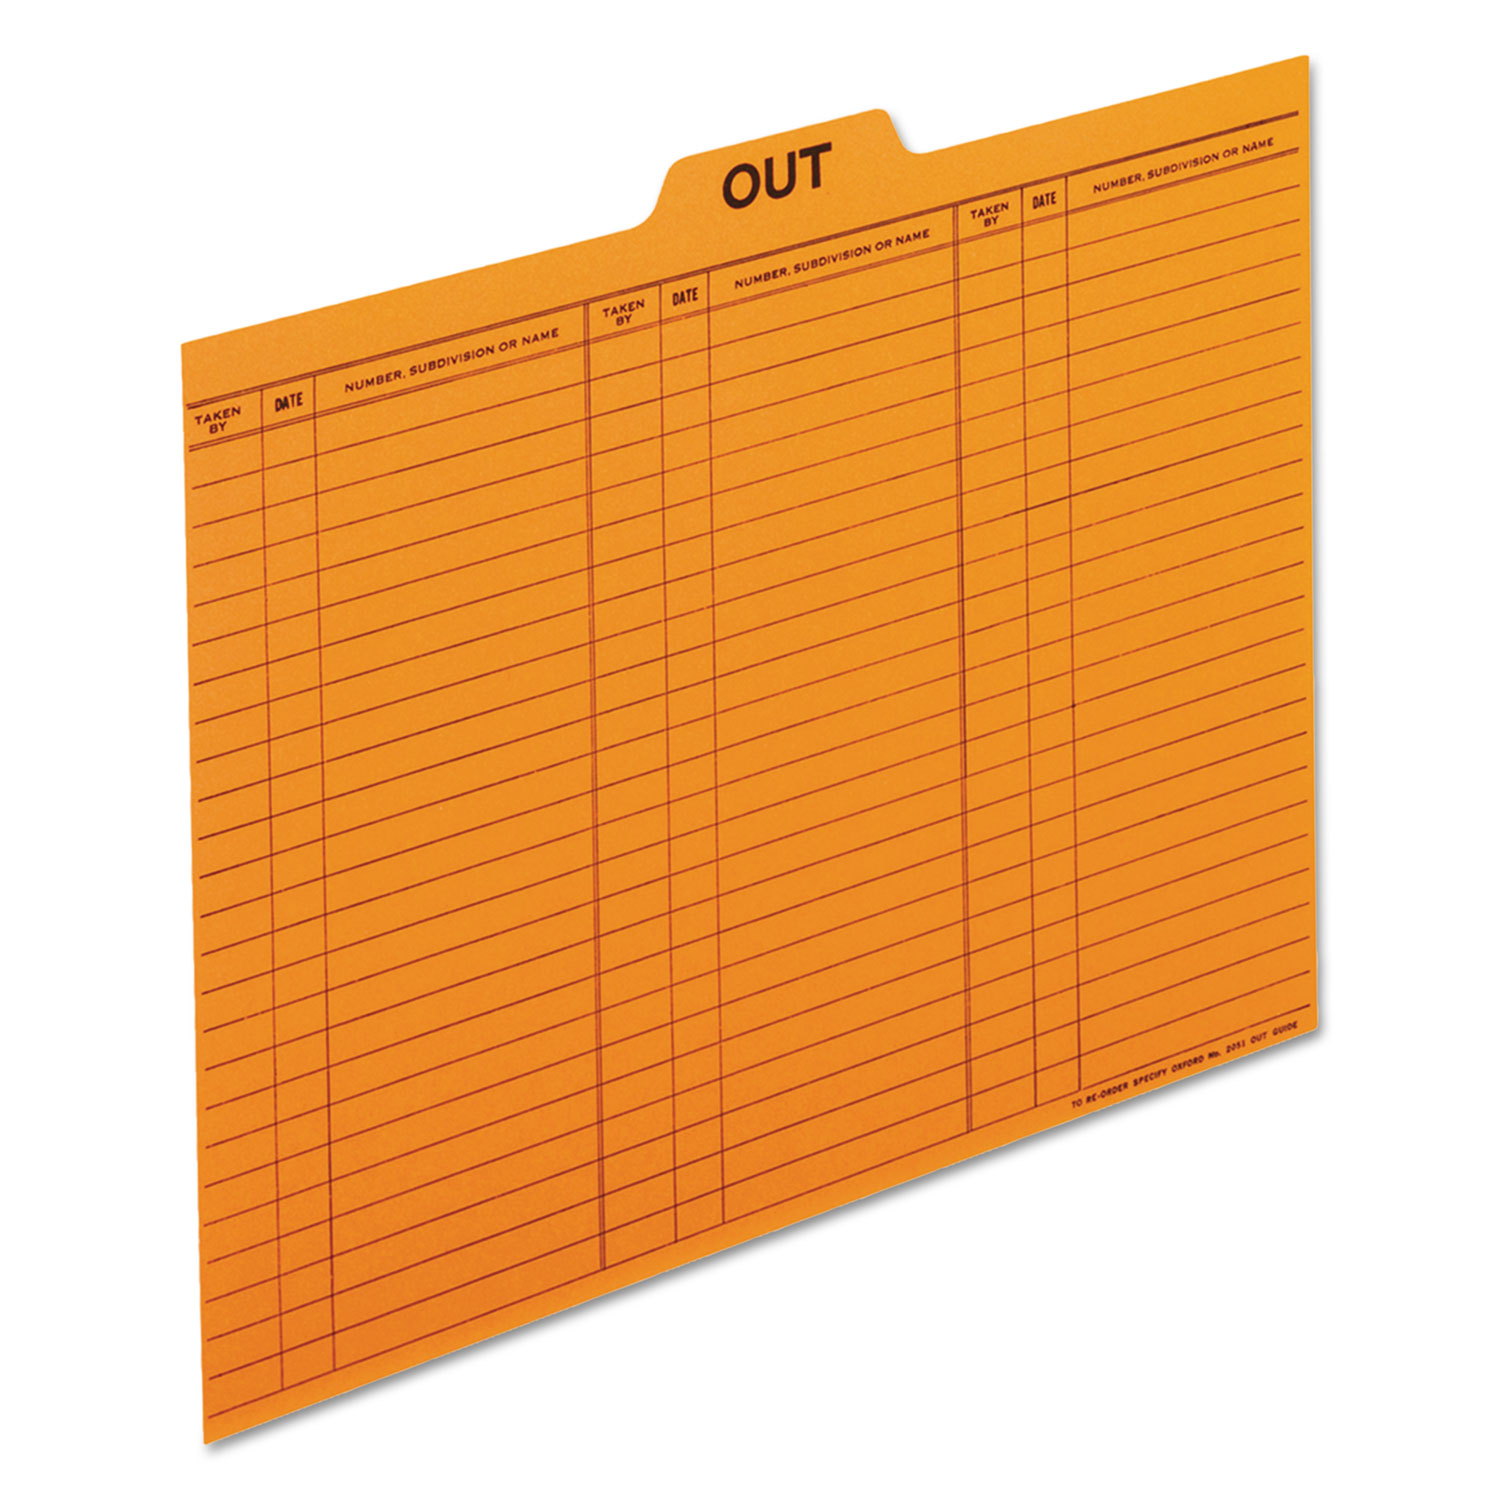  Pendaflex 2051 Salmon Colored Charge-Out Guides, 1/5-Cut Top Tab, Out, 8.5 x 11, Salmon, 100/Box (PFX2051) 